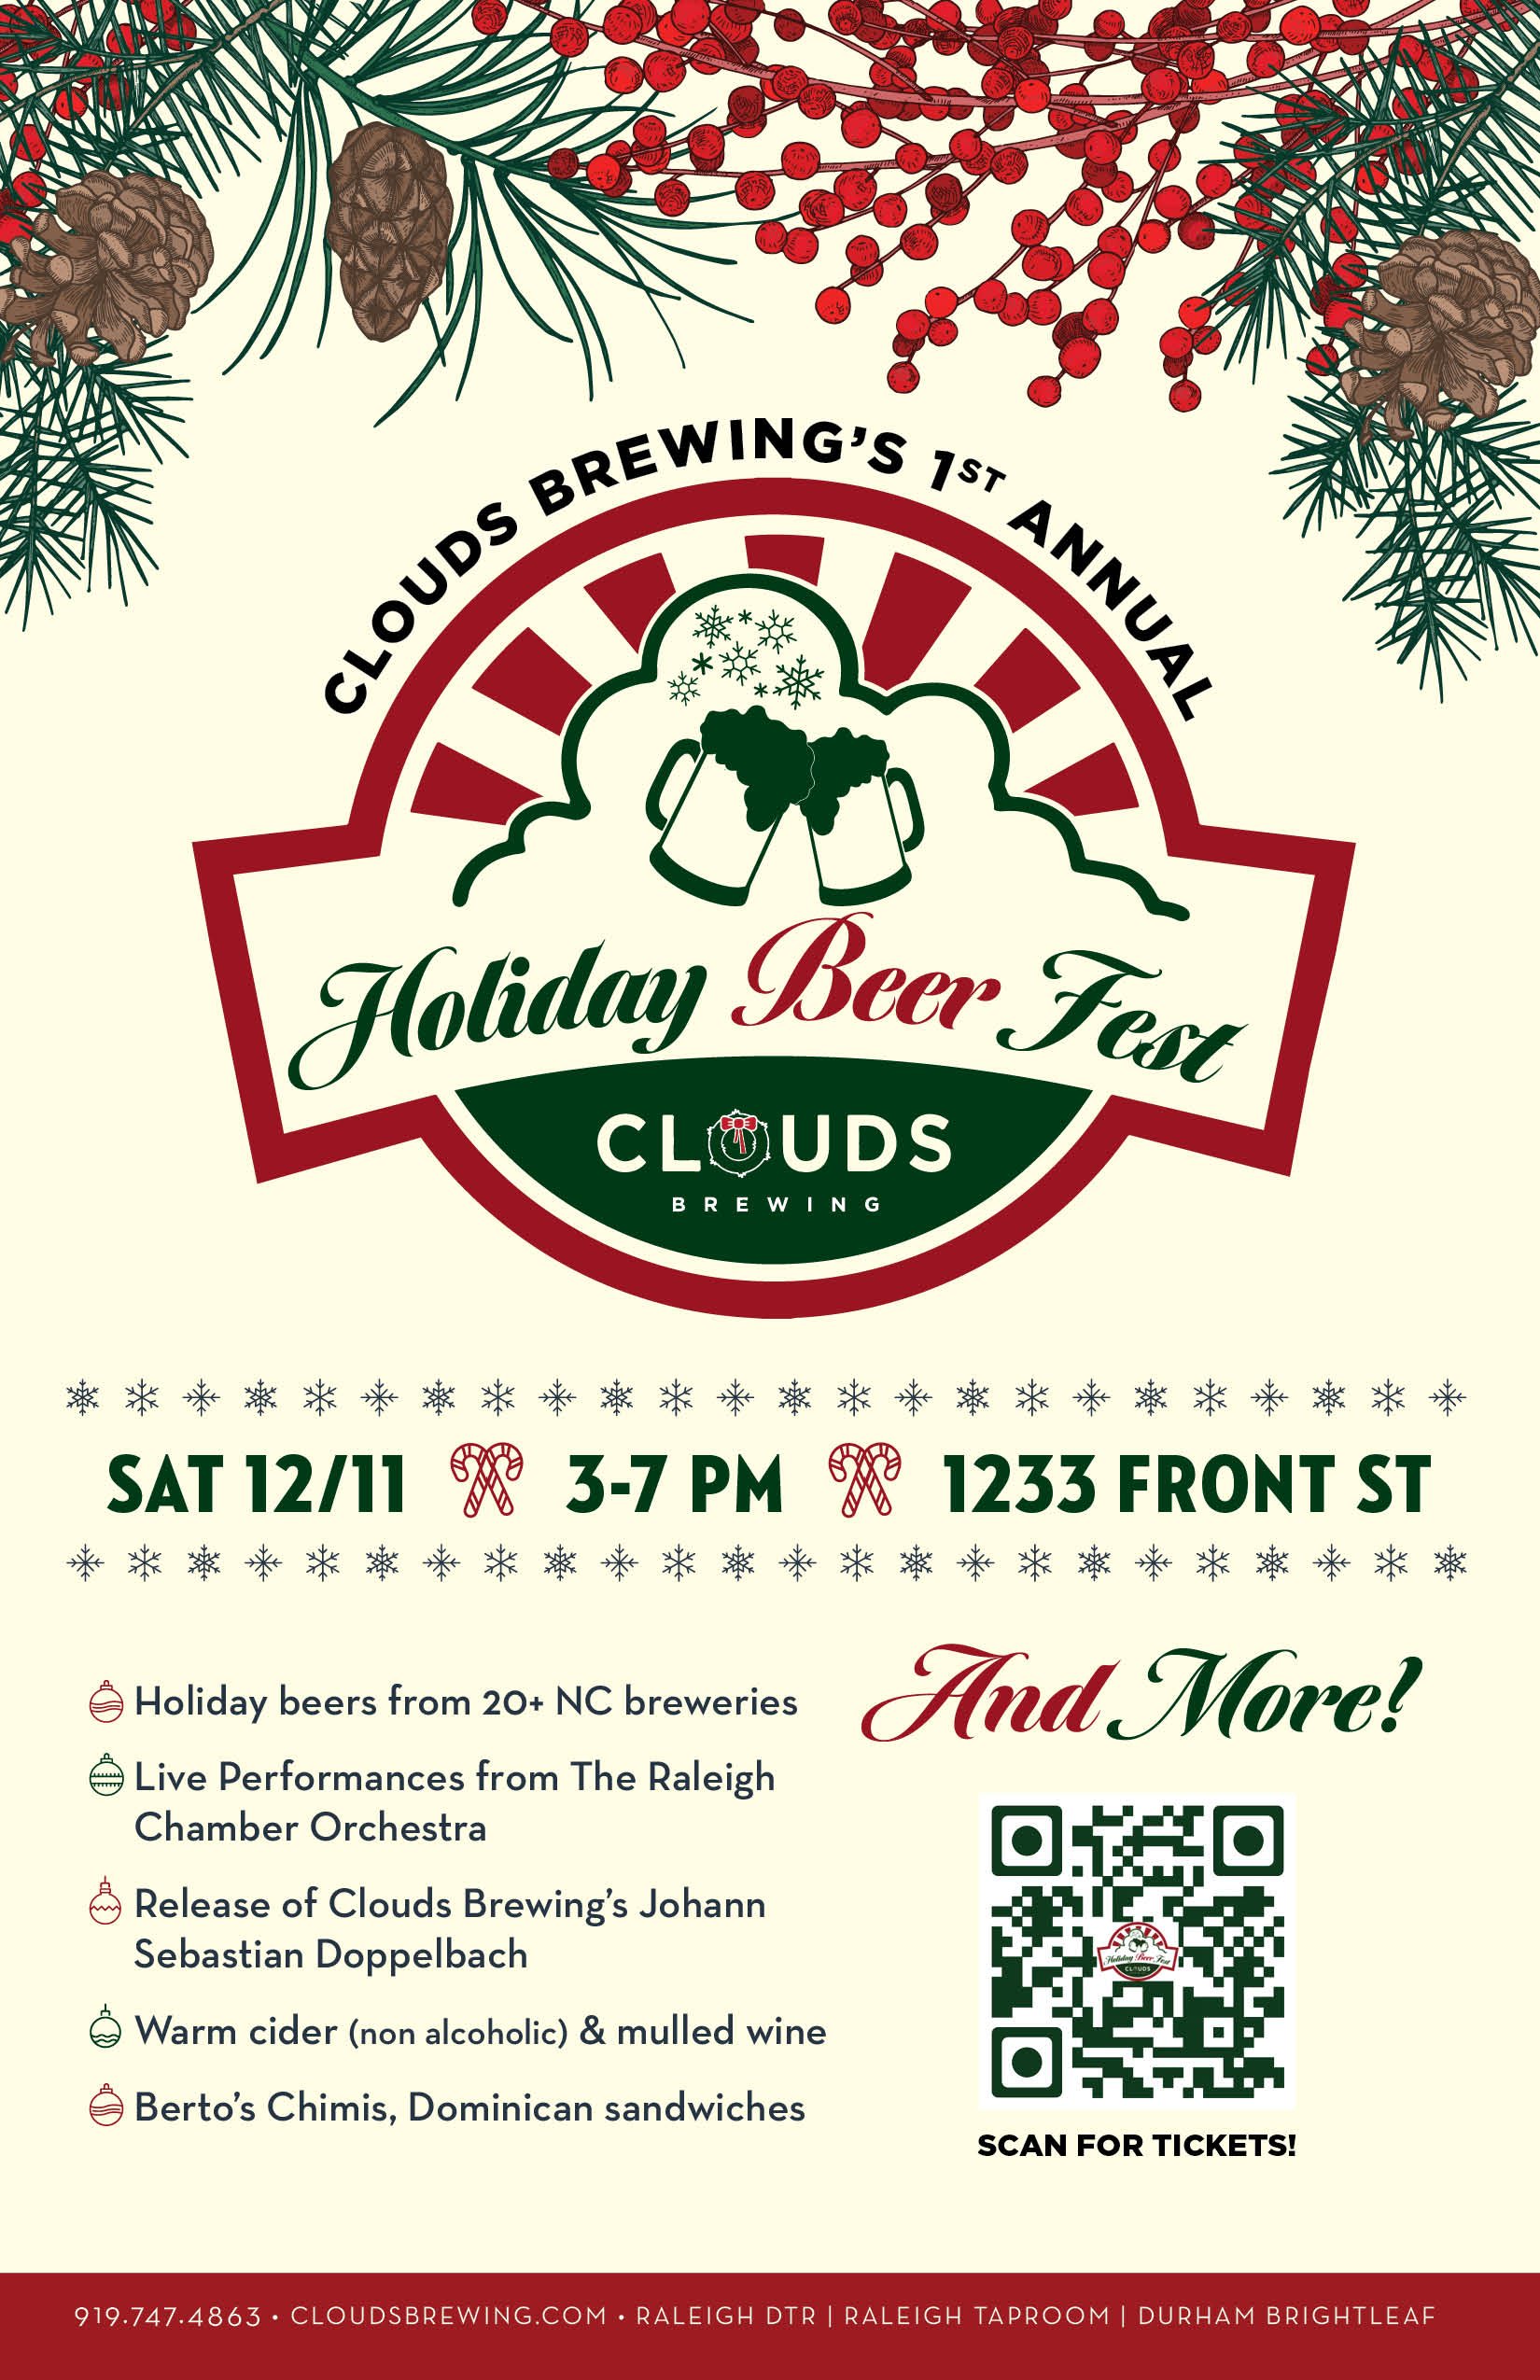 Clouds Brewing Holiday Beer Fest 